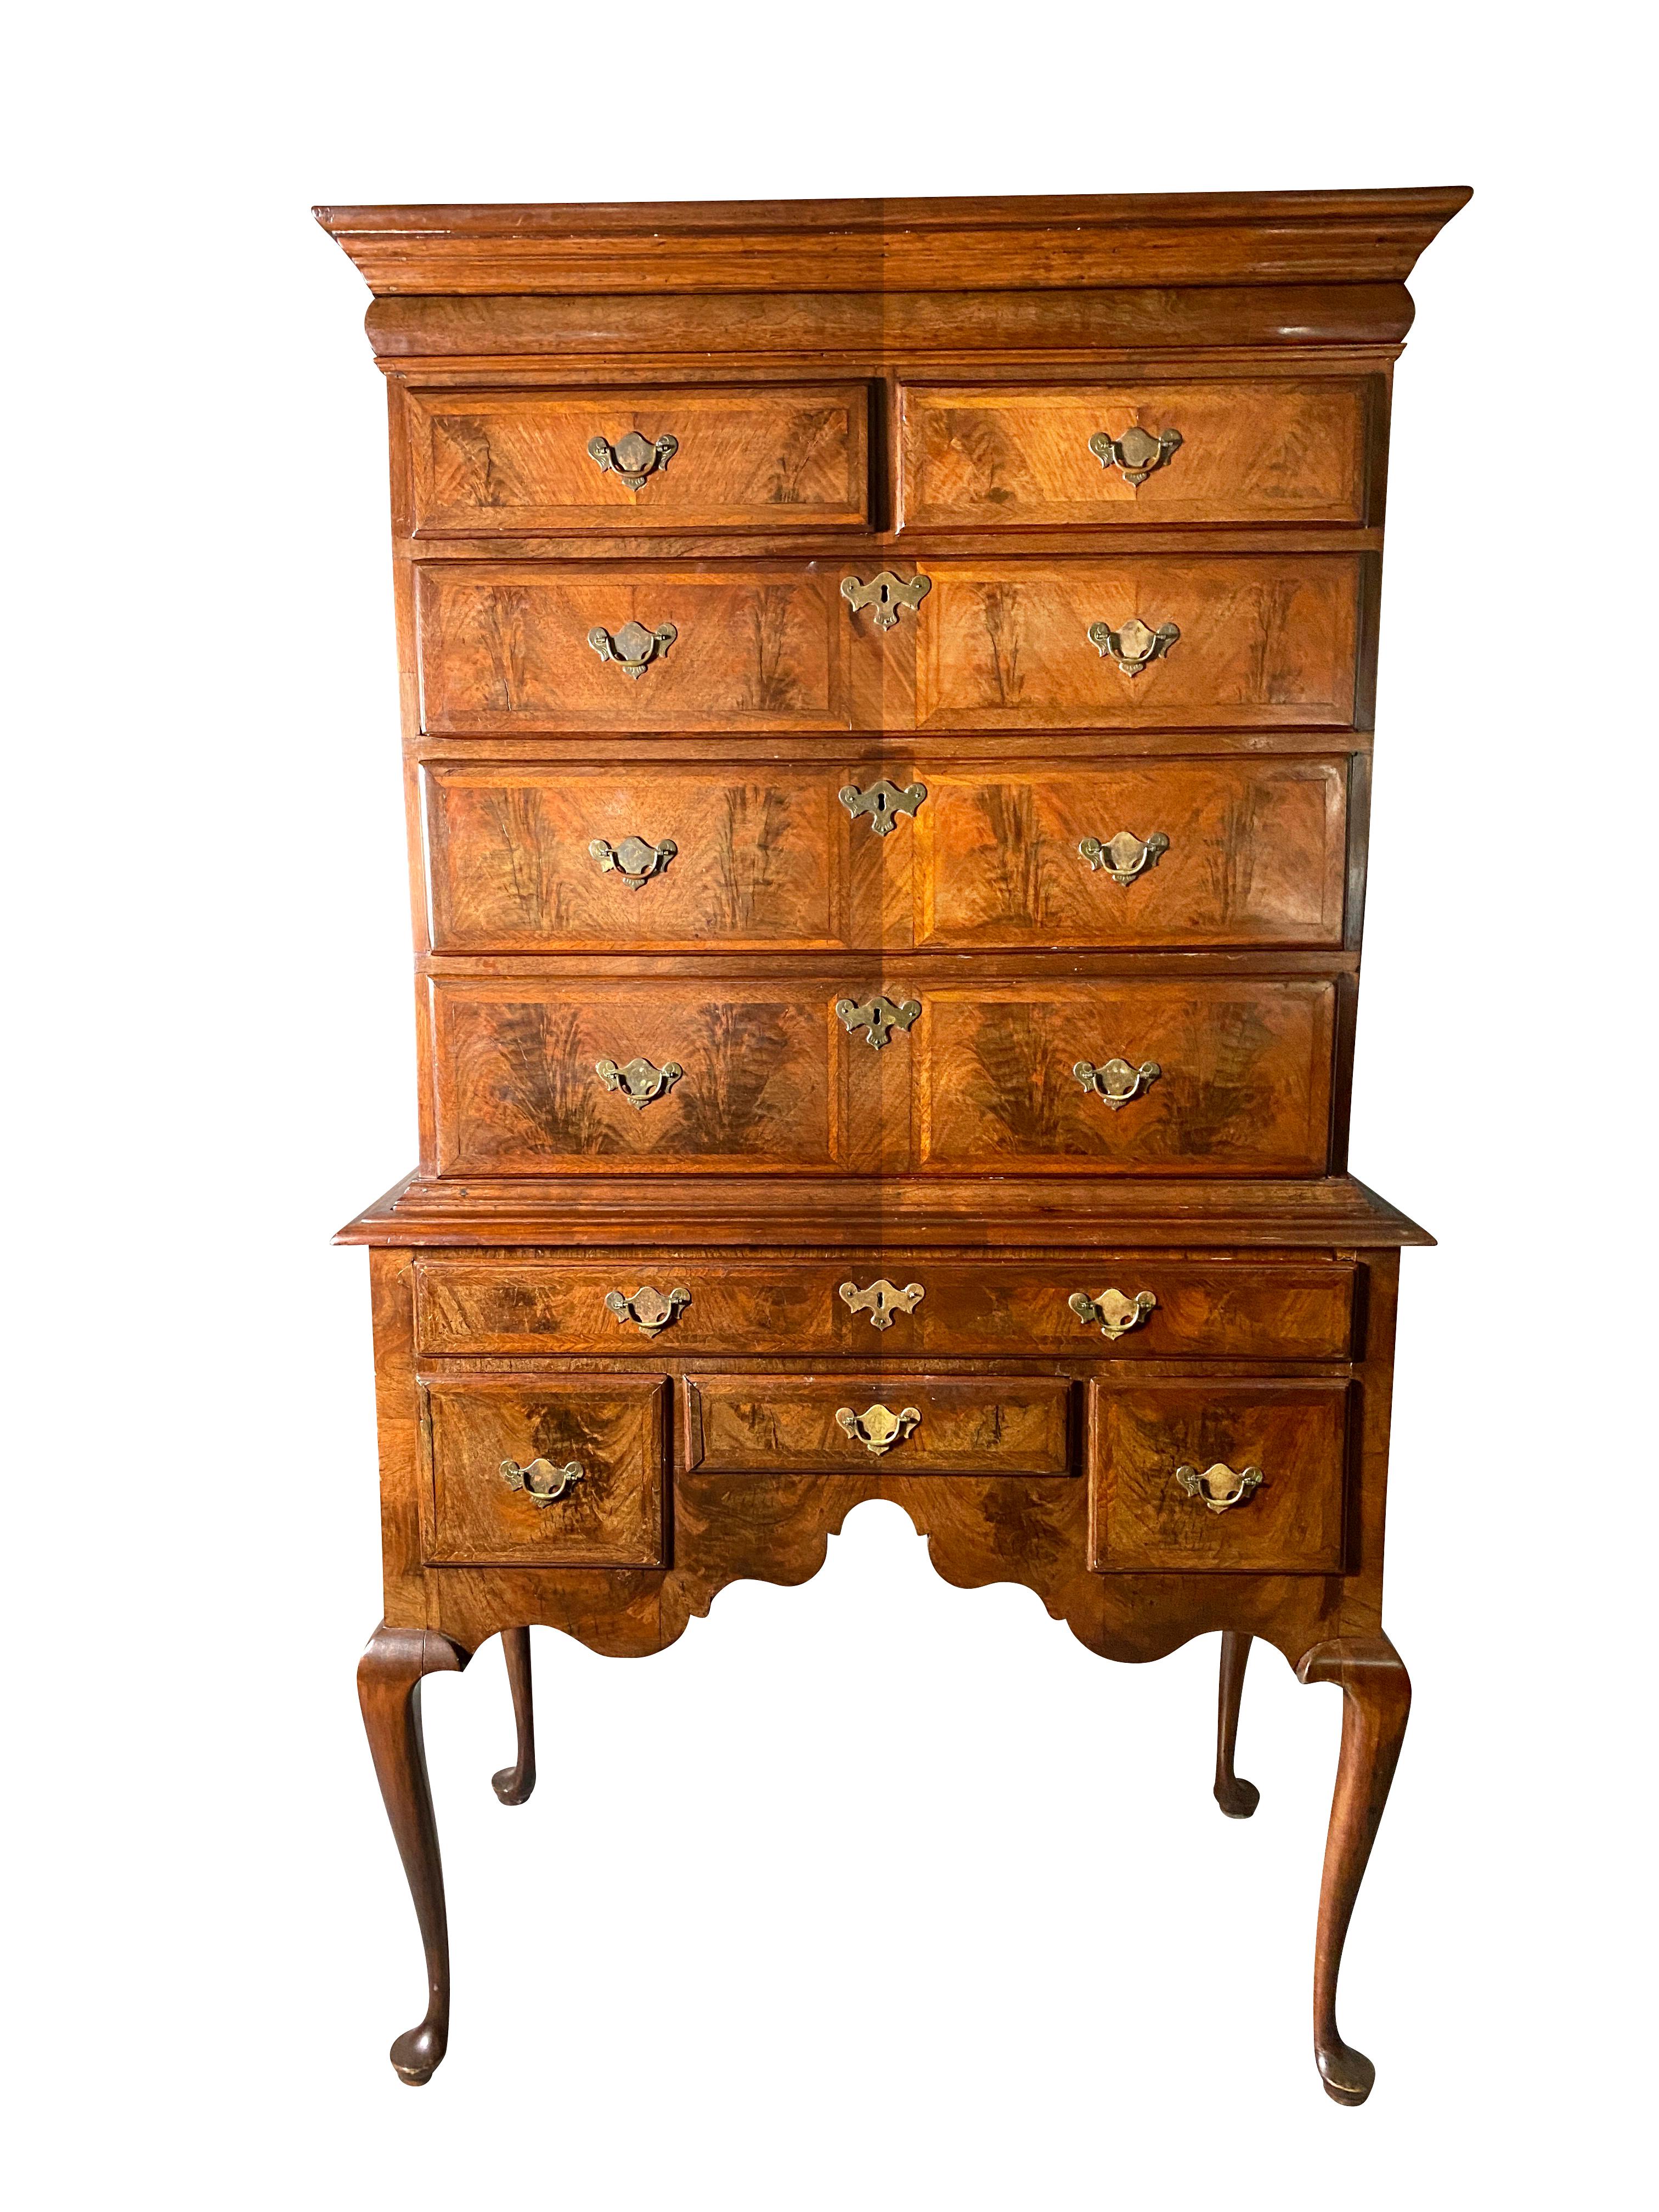 In two parts , the top with hidden cushion drawer in cornice over four drawers , the base with a long drawer over three small drawers , shaped skirt and raised on cabriole legs ending on pad feet. This piece is from the North shore coastal towns